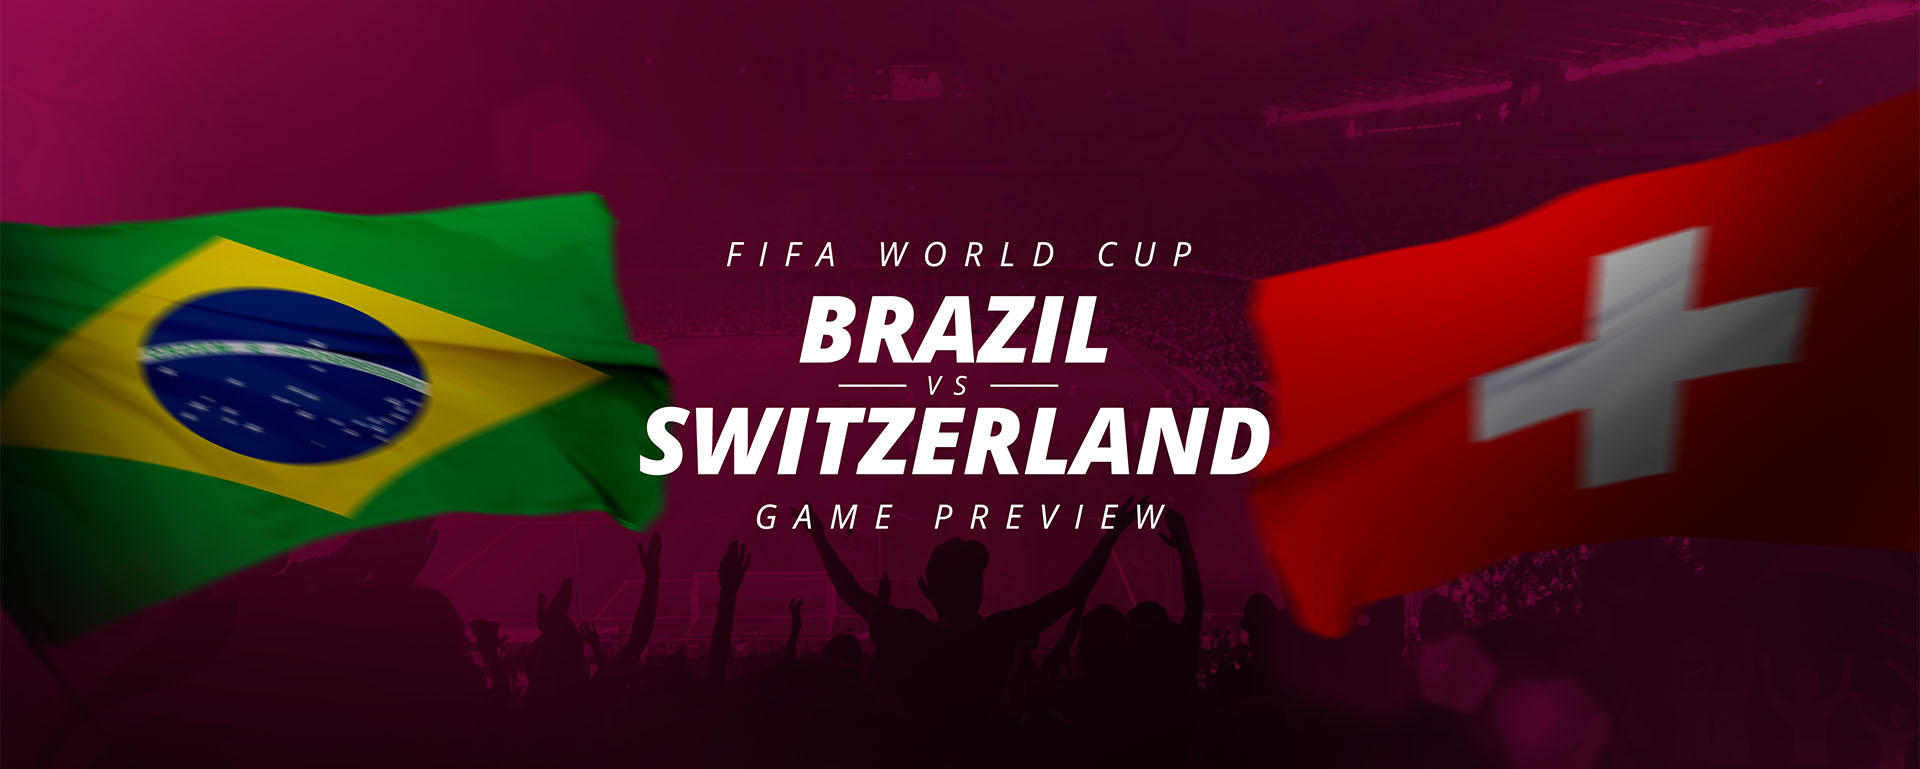 FIFA WORLD CUP: BRAZIL V SWITZERLAND – GAME PREVIEW